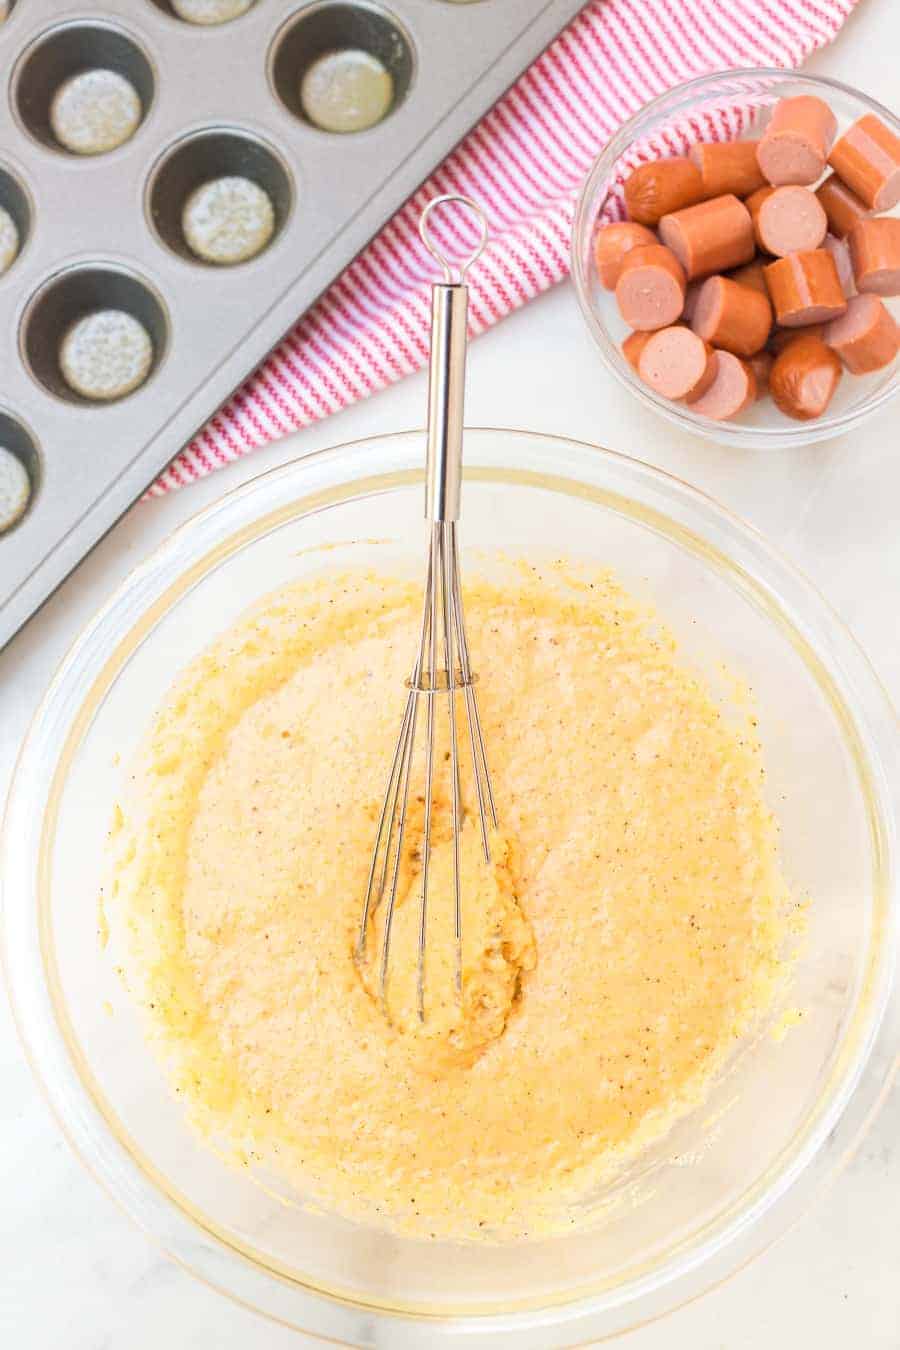 cornbread dough in a clear bowl with a whisk.